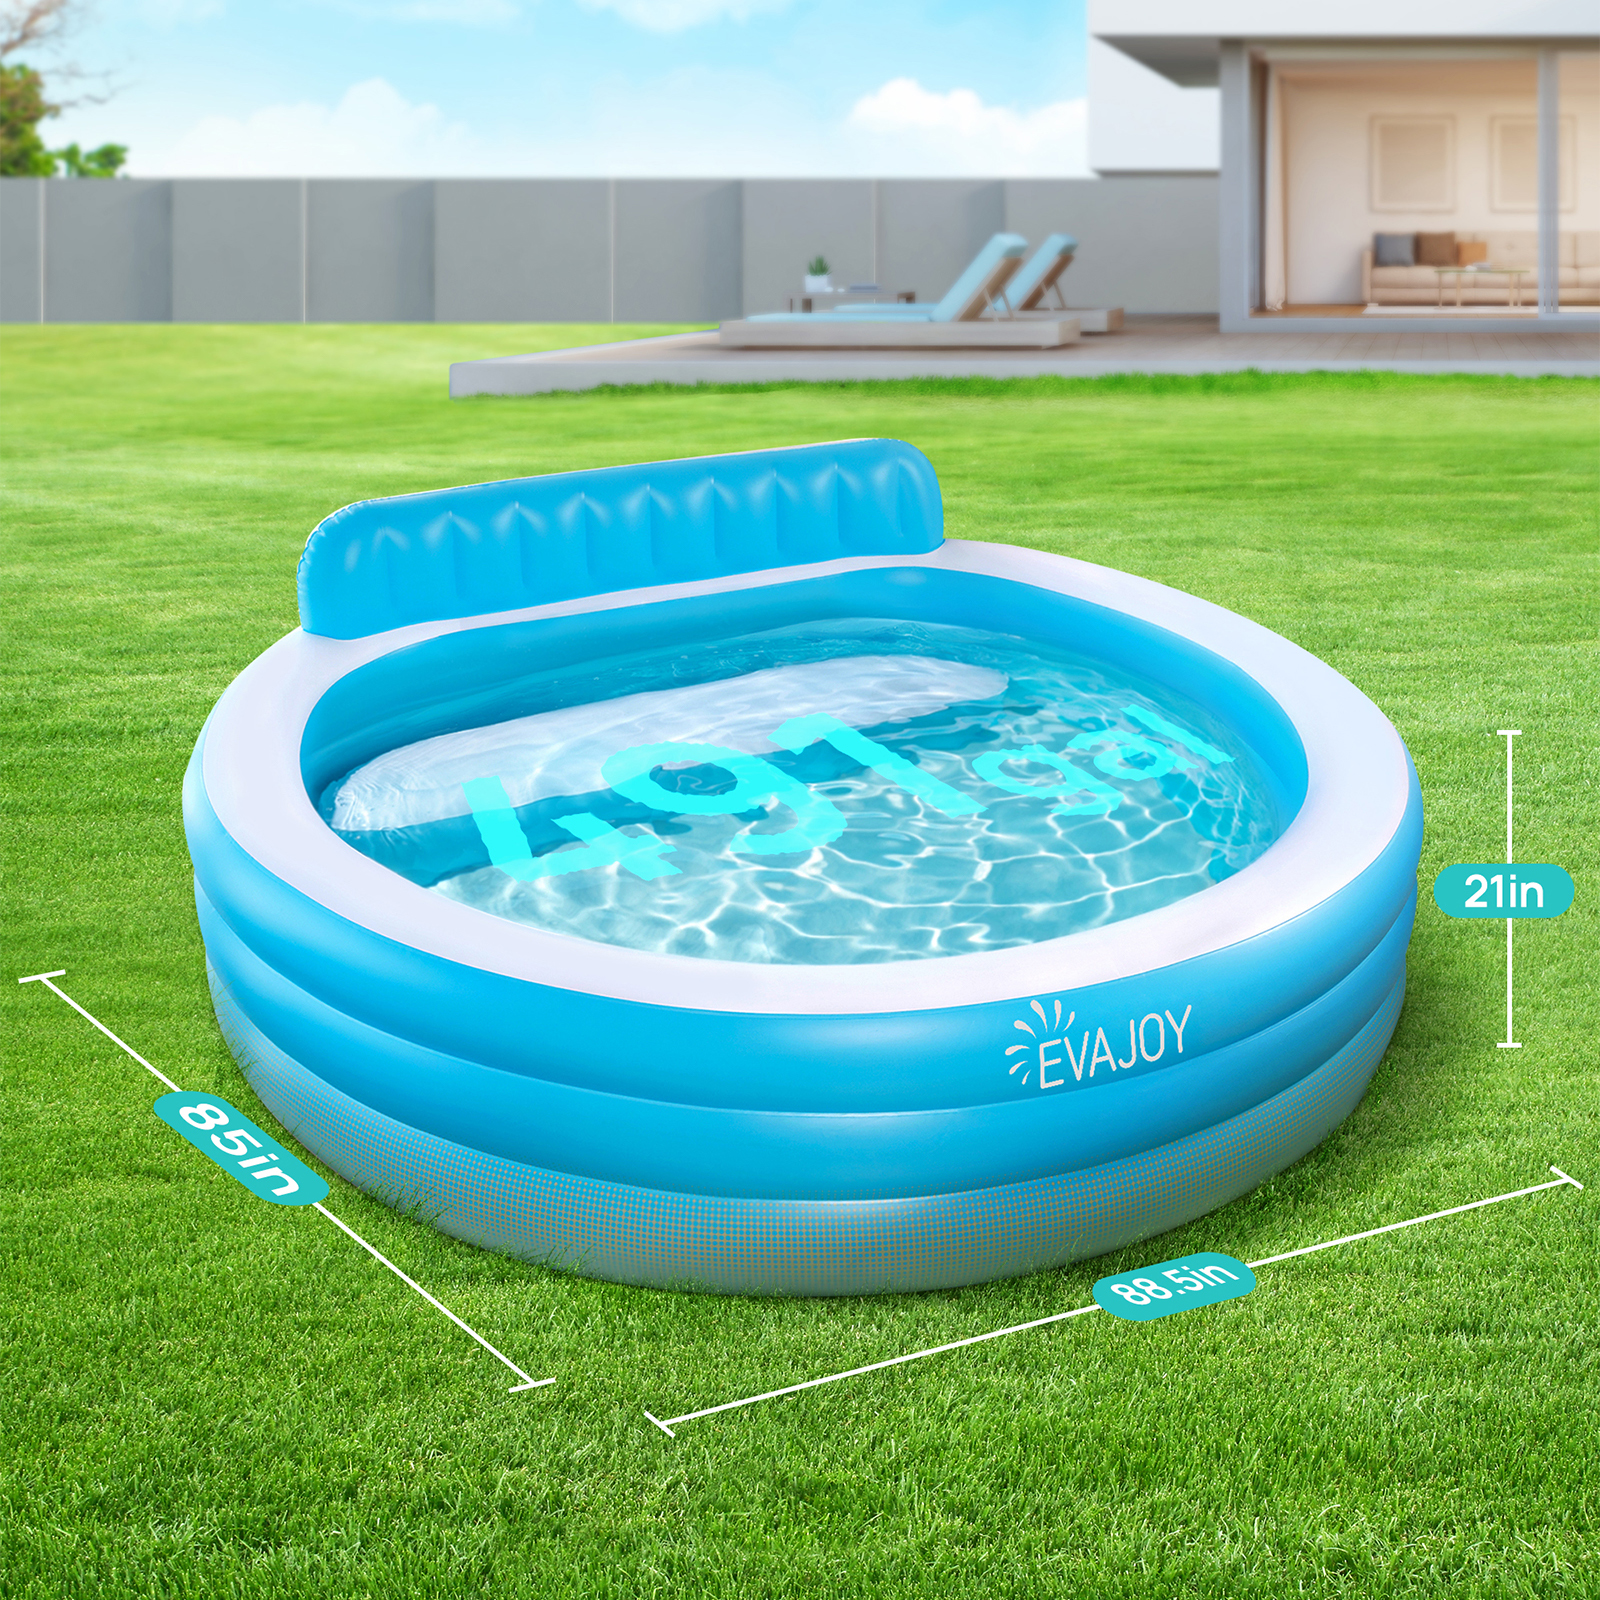 Evajoy Inflatable Pool, Family Lounge Swimming Pool with Seat for Kids Aldult, Round, 7.33 x 7.11 x 2.5 ft - image 5 of 11